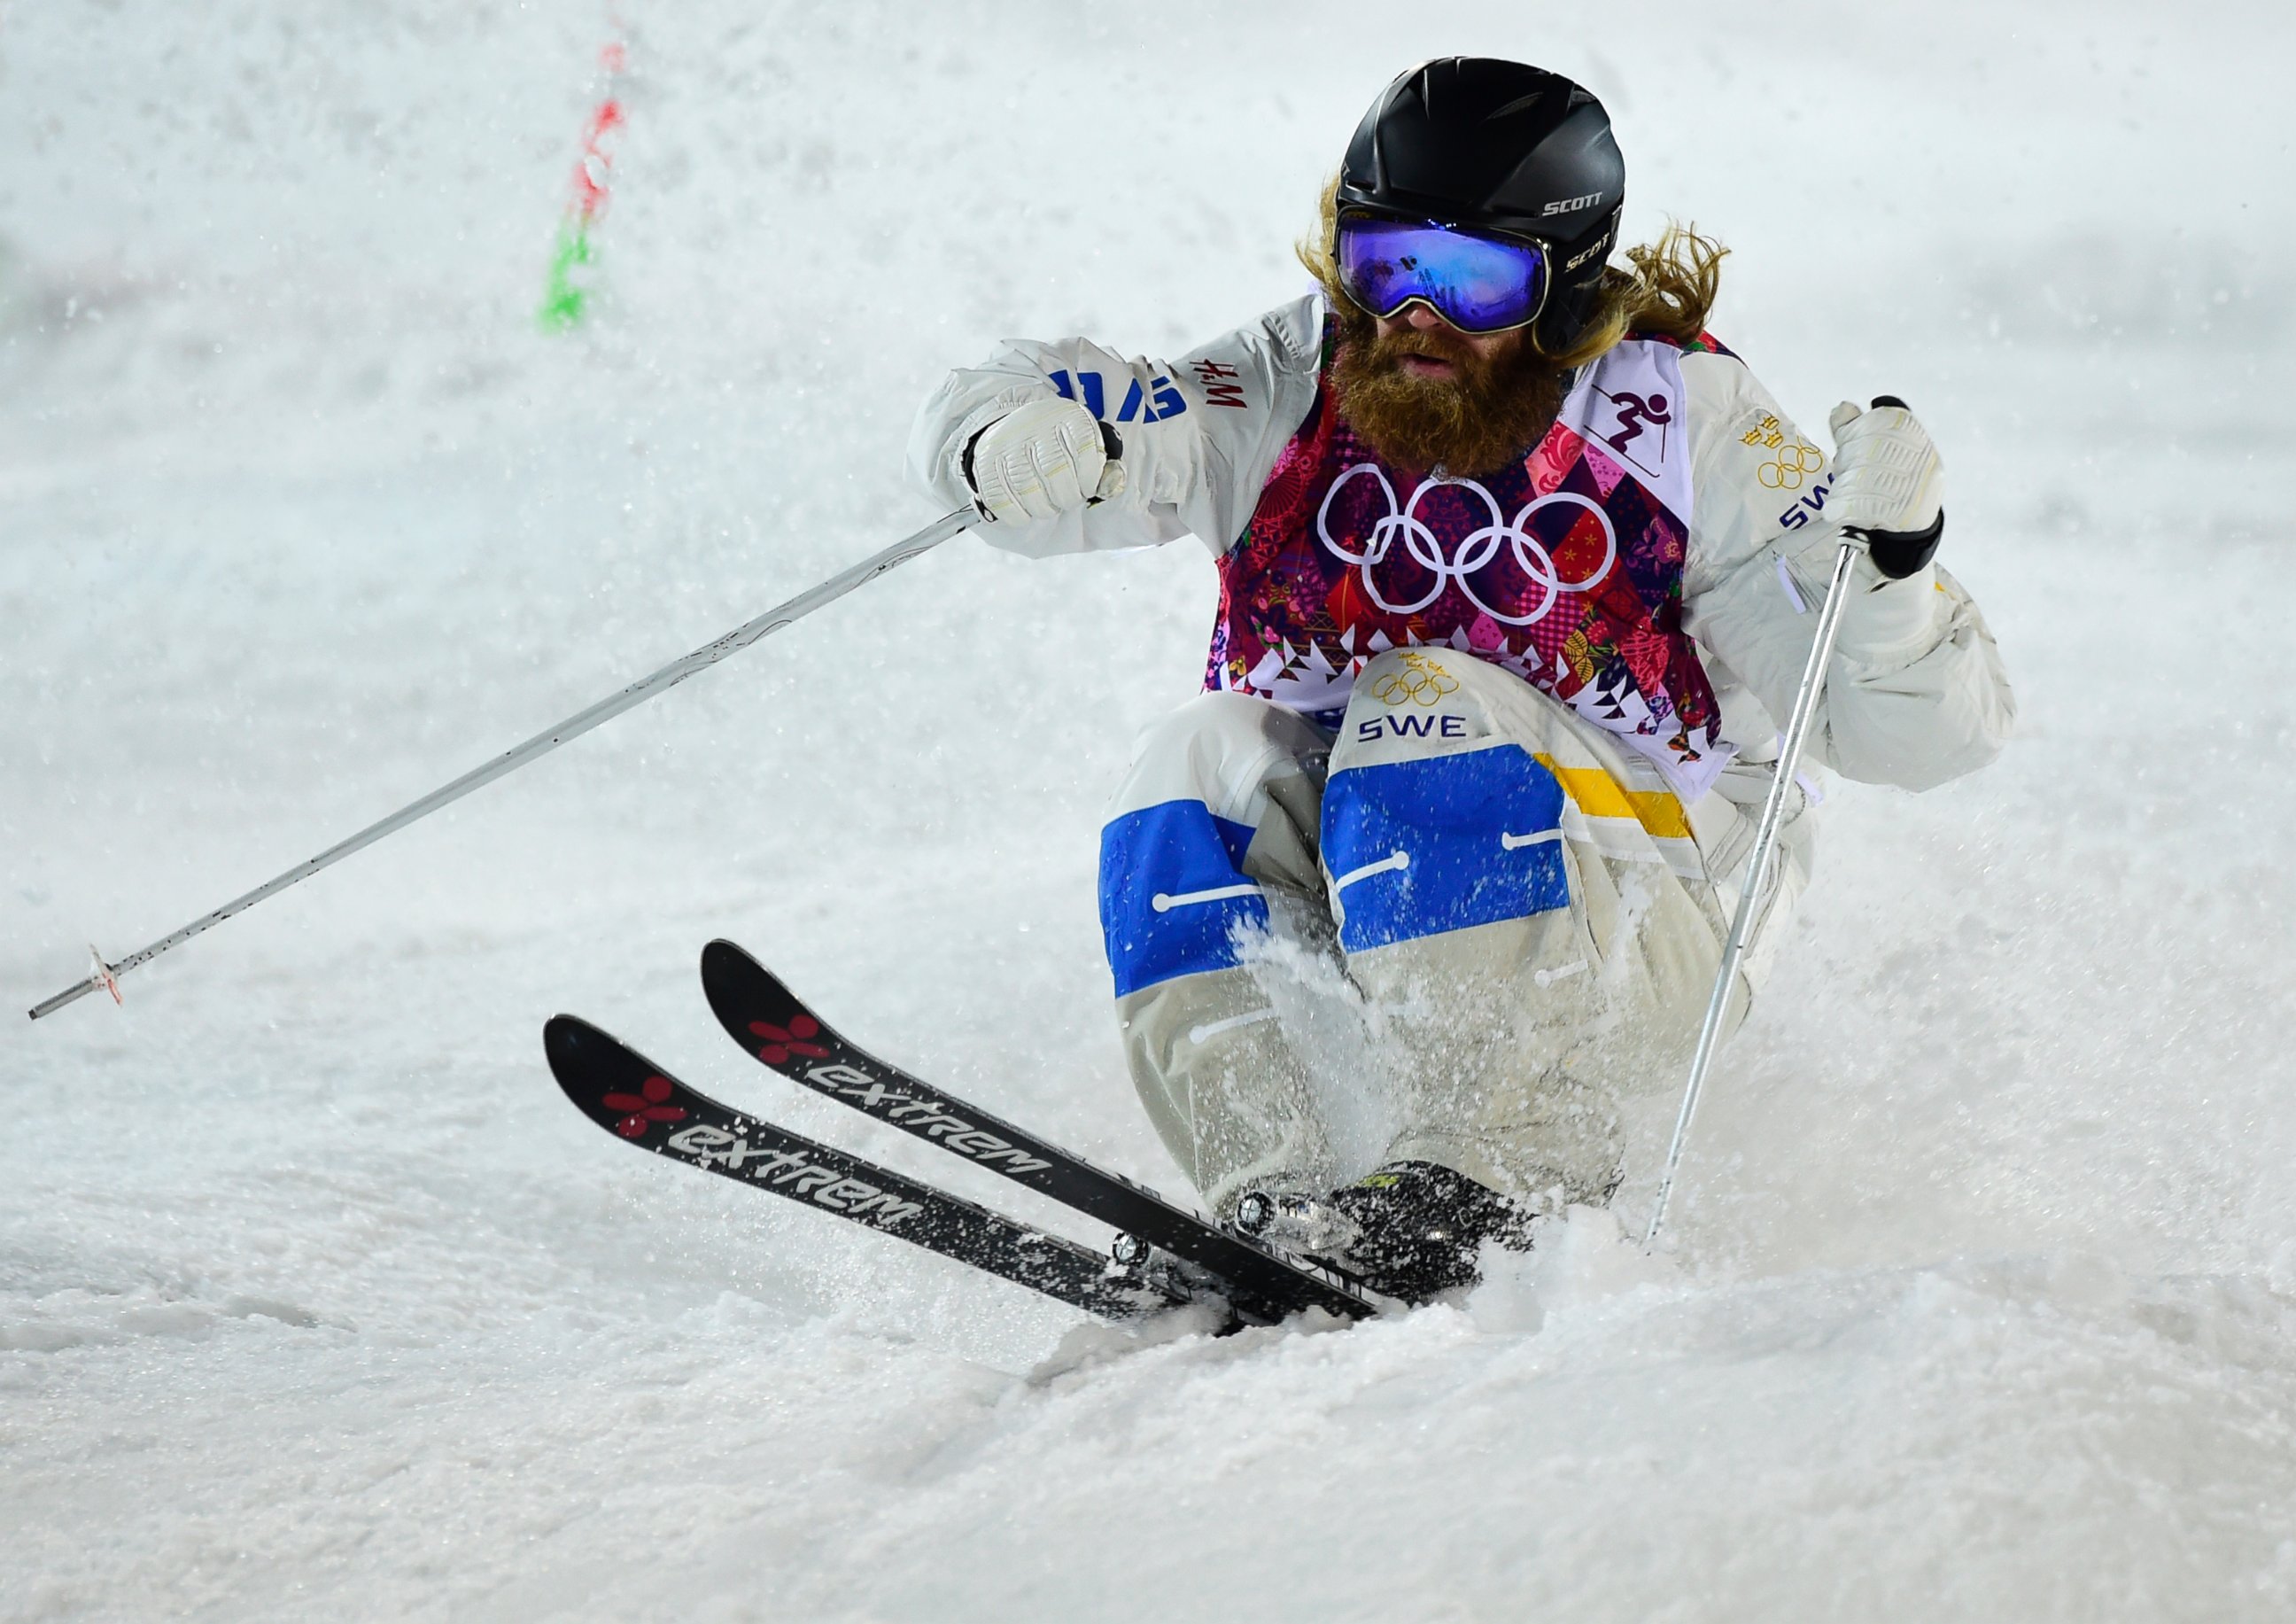 PHOTO: Sweden's Per Spett competes in the Men's Freestyle Skiing Moguls finals 